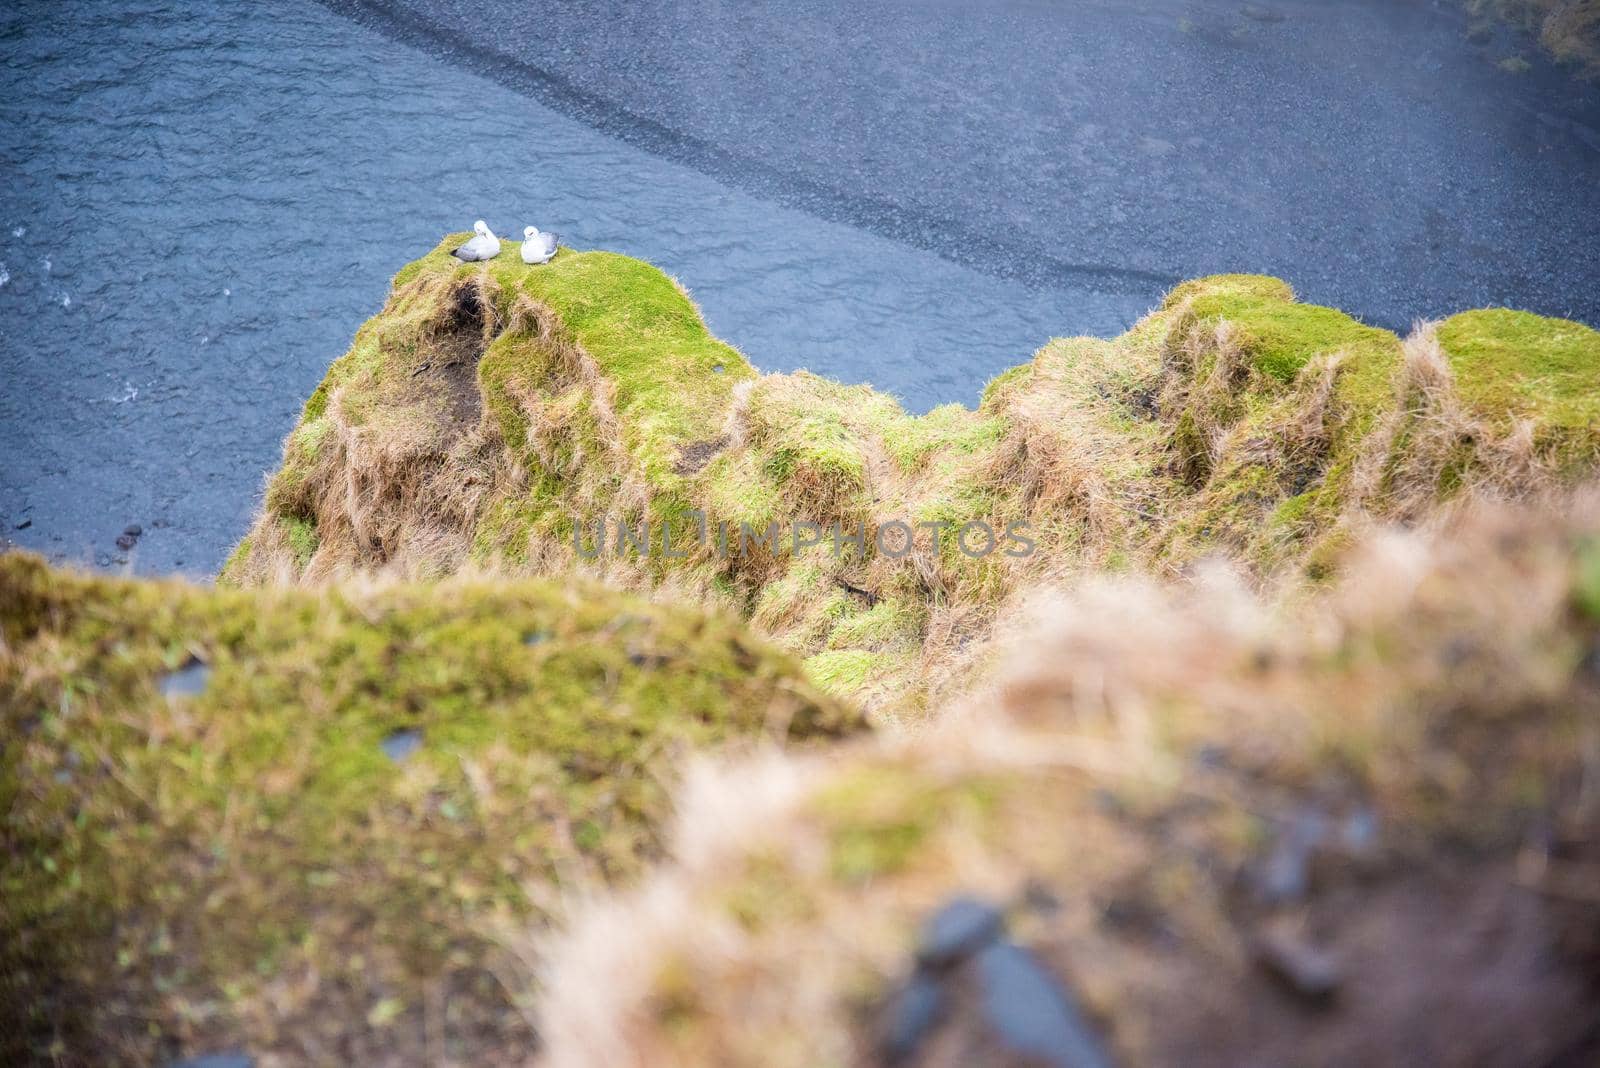 Looking over the edge of a mossy canyon in Iceland with two doves sitting together love birds with river below them.